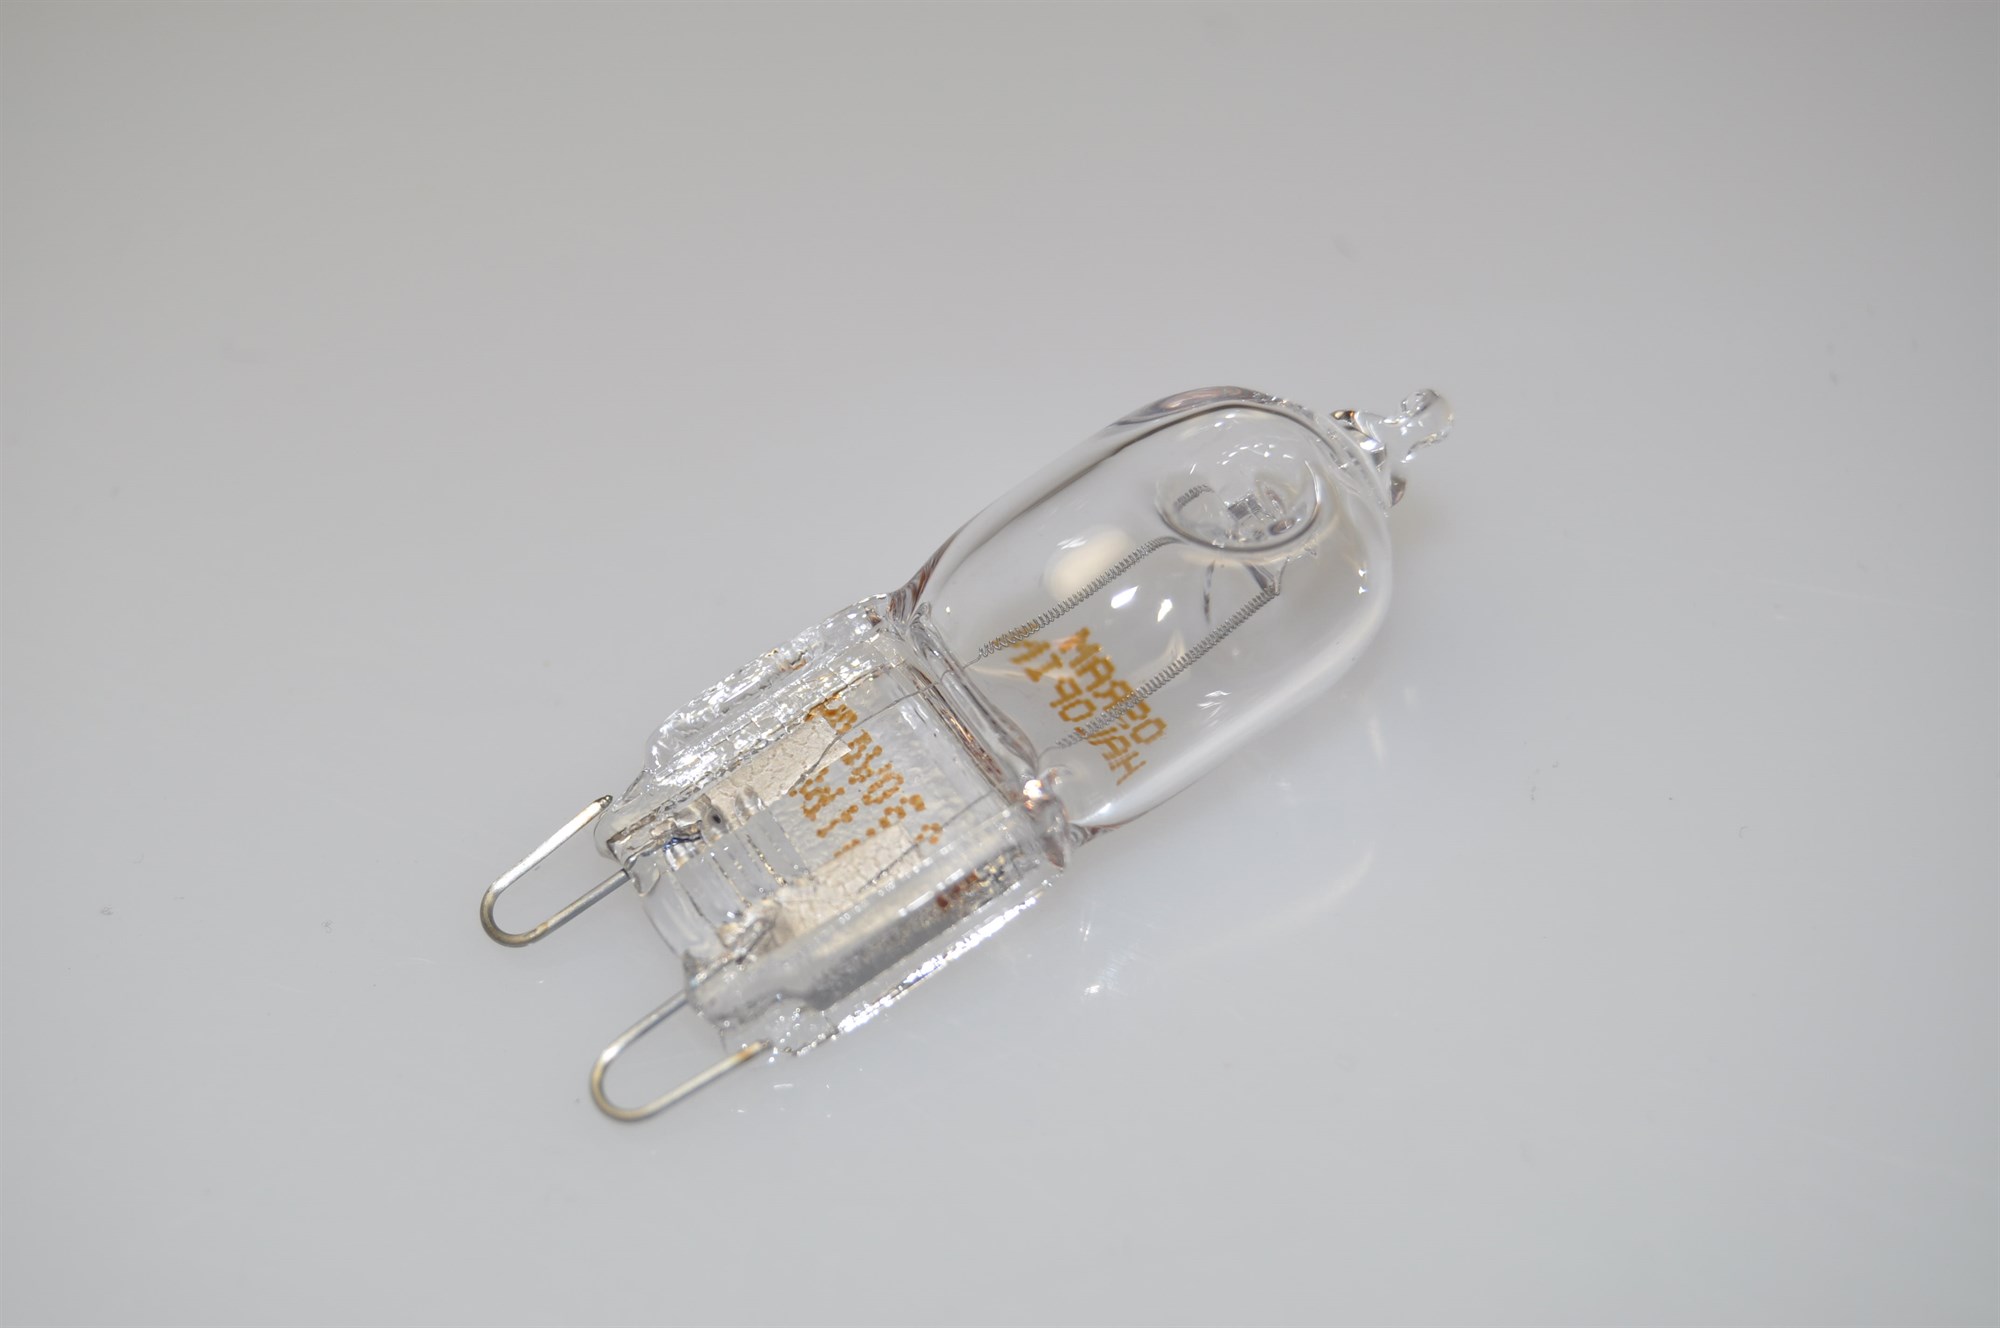 240V 2 x 40 w G9 Halogen oven lamp capsule for use in an AEG oven 300° heat resistant bulb 